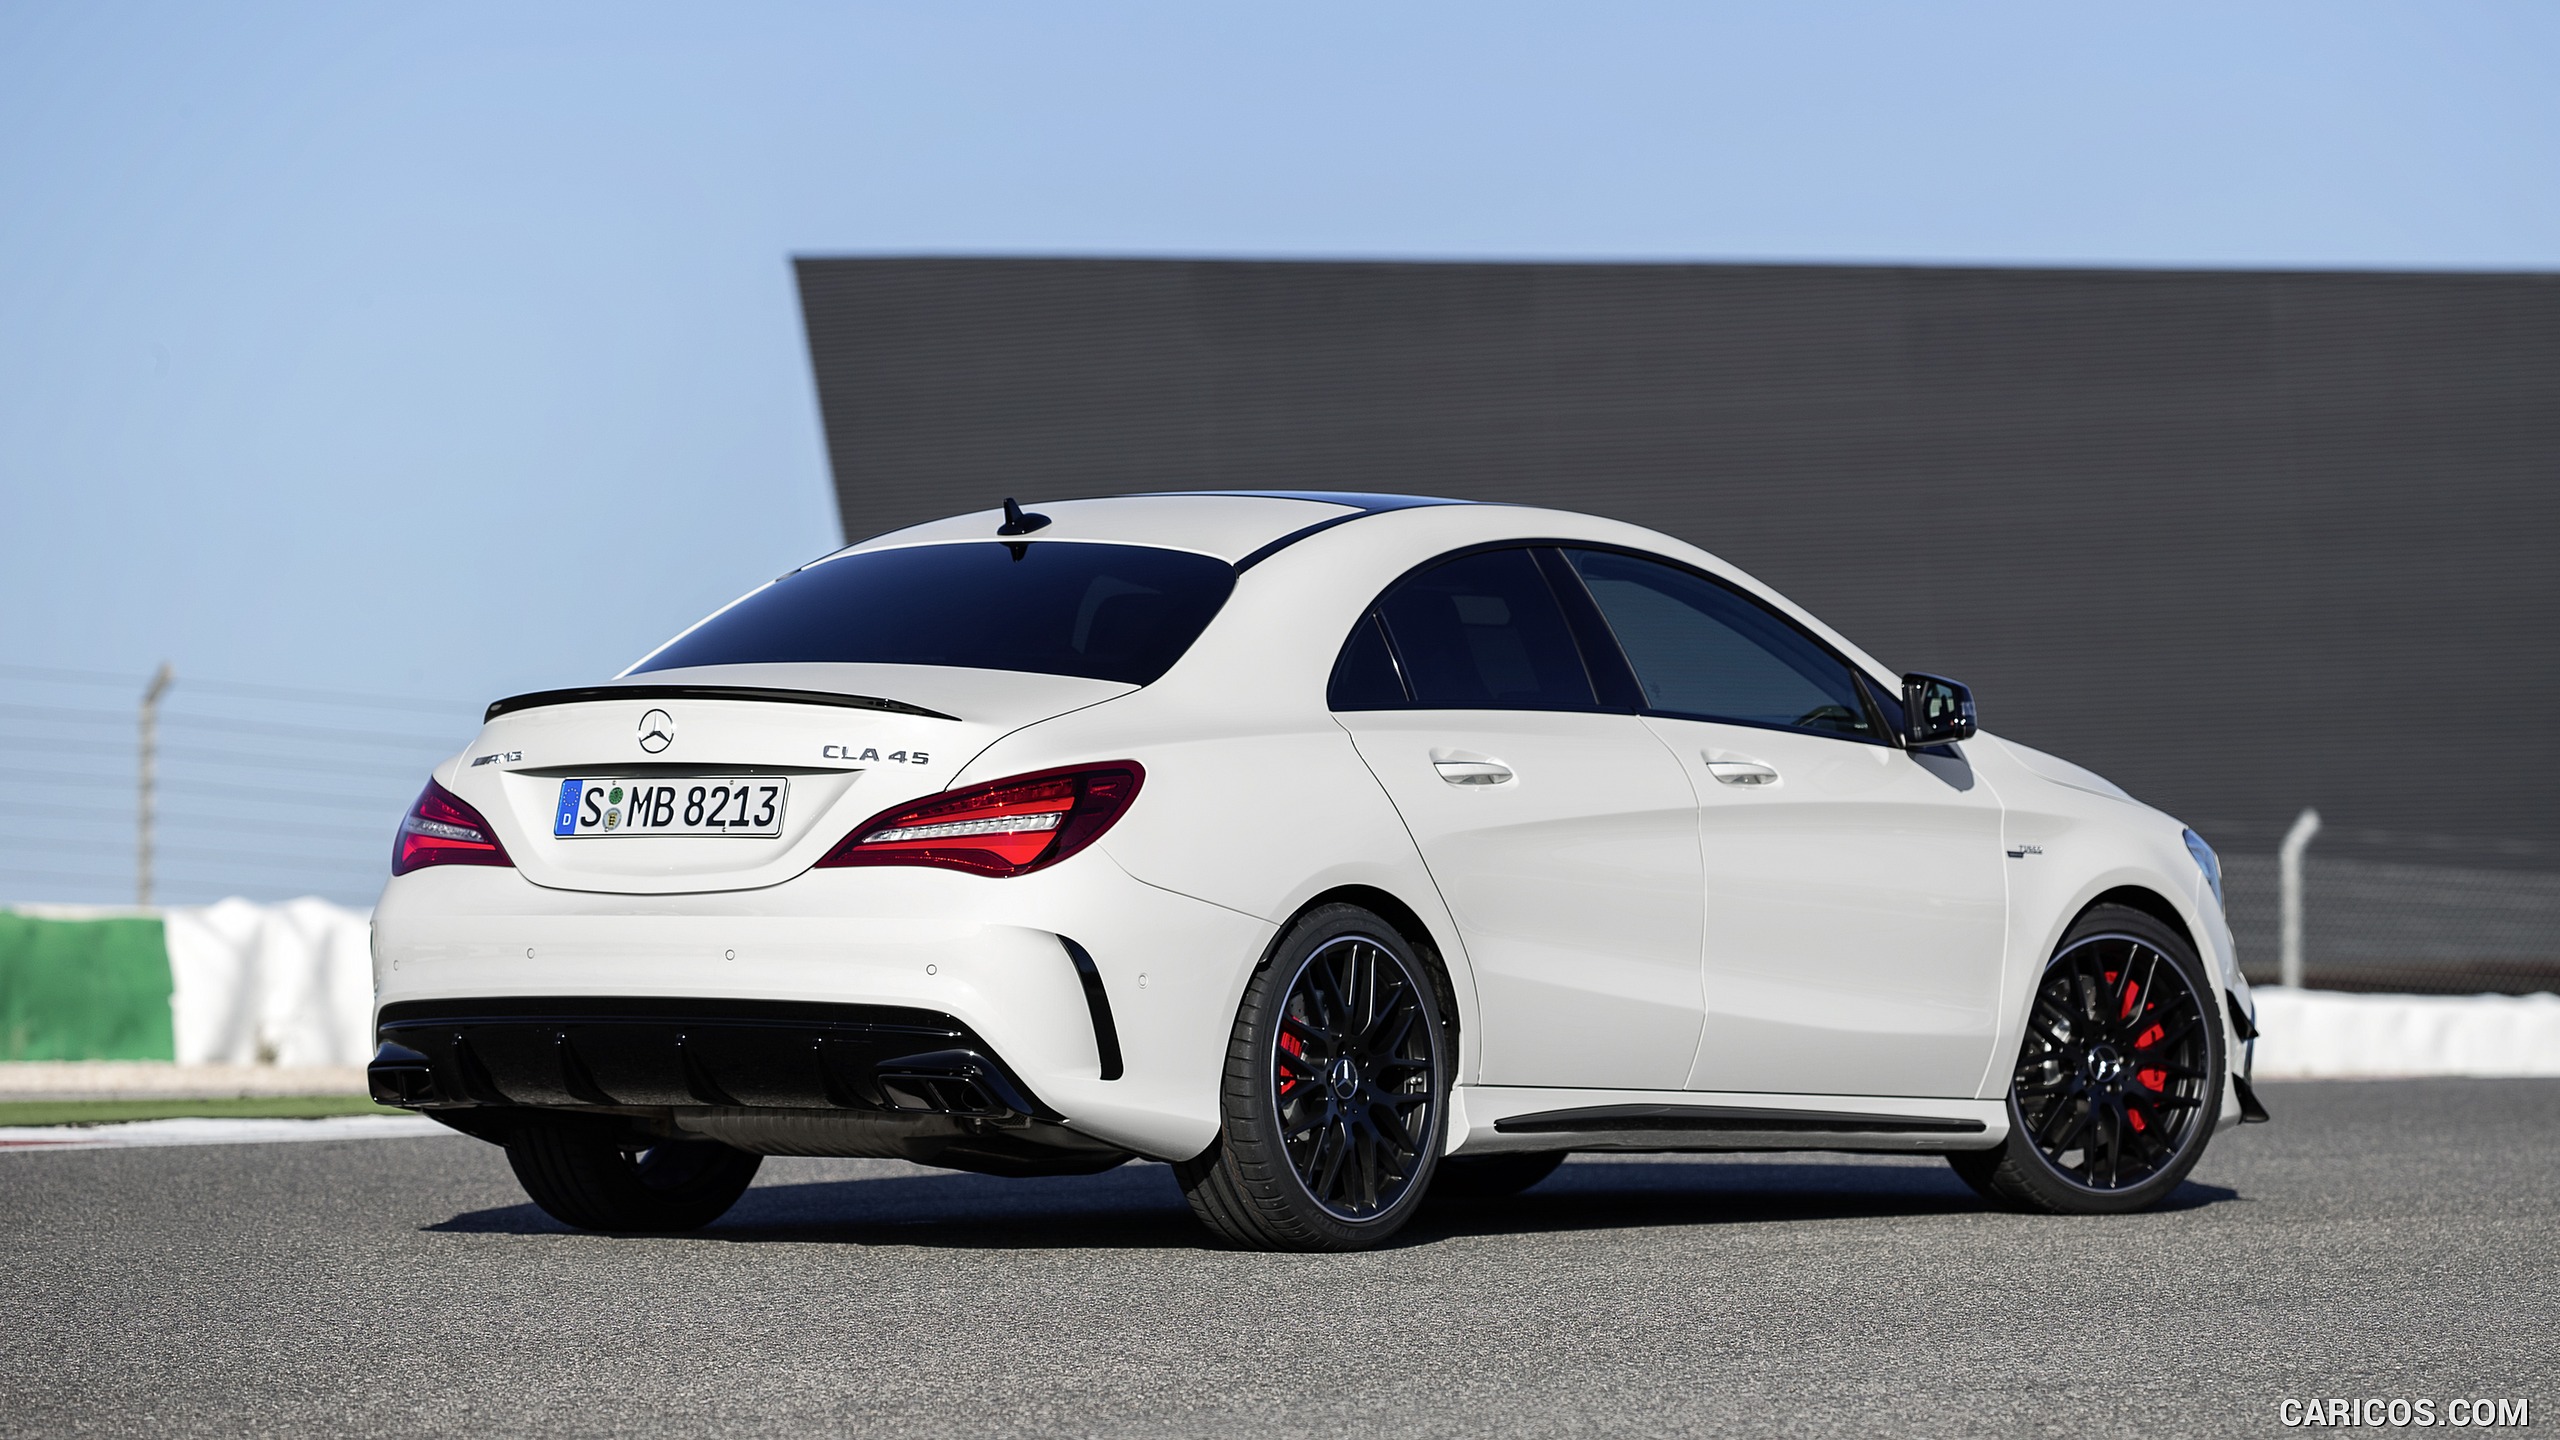 2017 Mercedes-AMG CLA 45 Coupé with Aerodynamics Package (Chassis: C117, Color: Diamond White) - Rear, #8 of 11